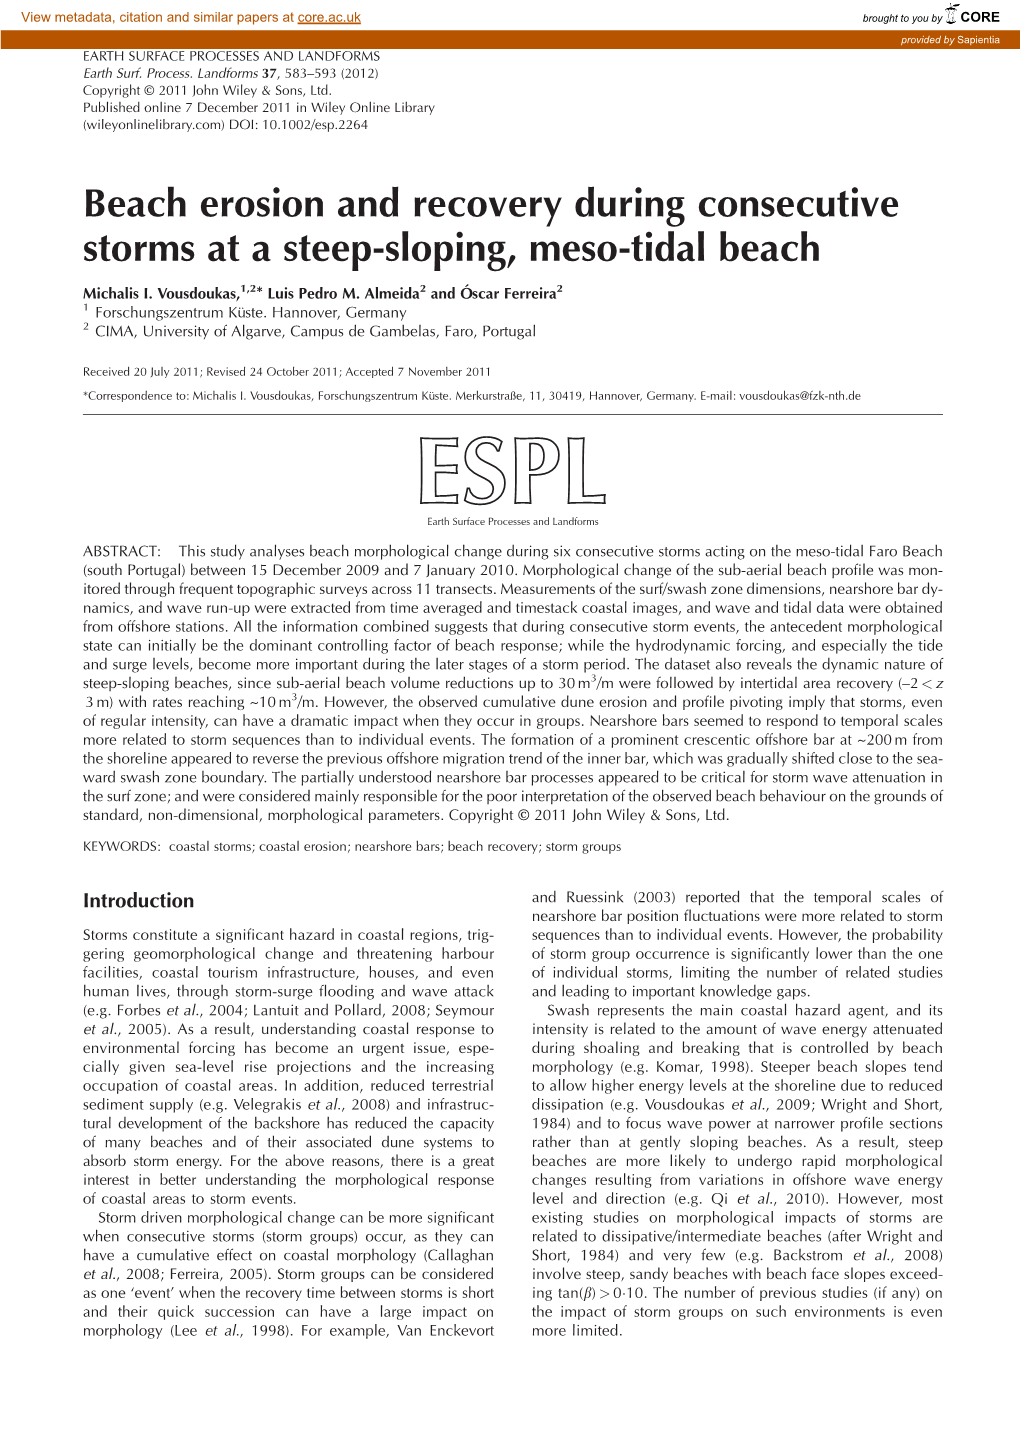 Beach Erosion and Recovery During Consecutive Storms at a Steep-Sloping, Meso-Tidal Beach